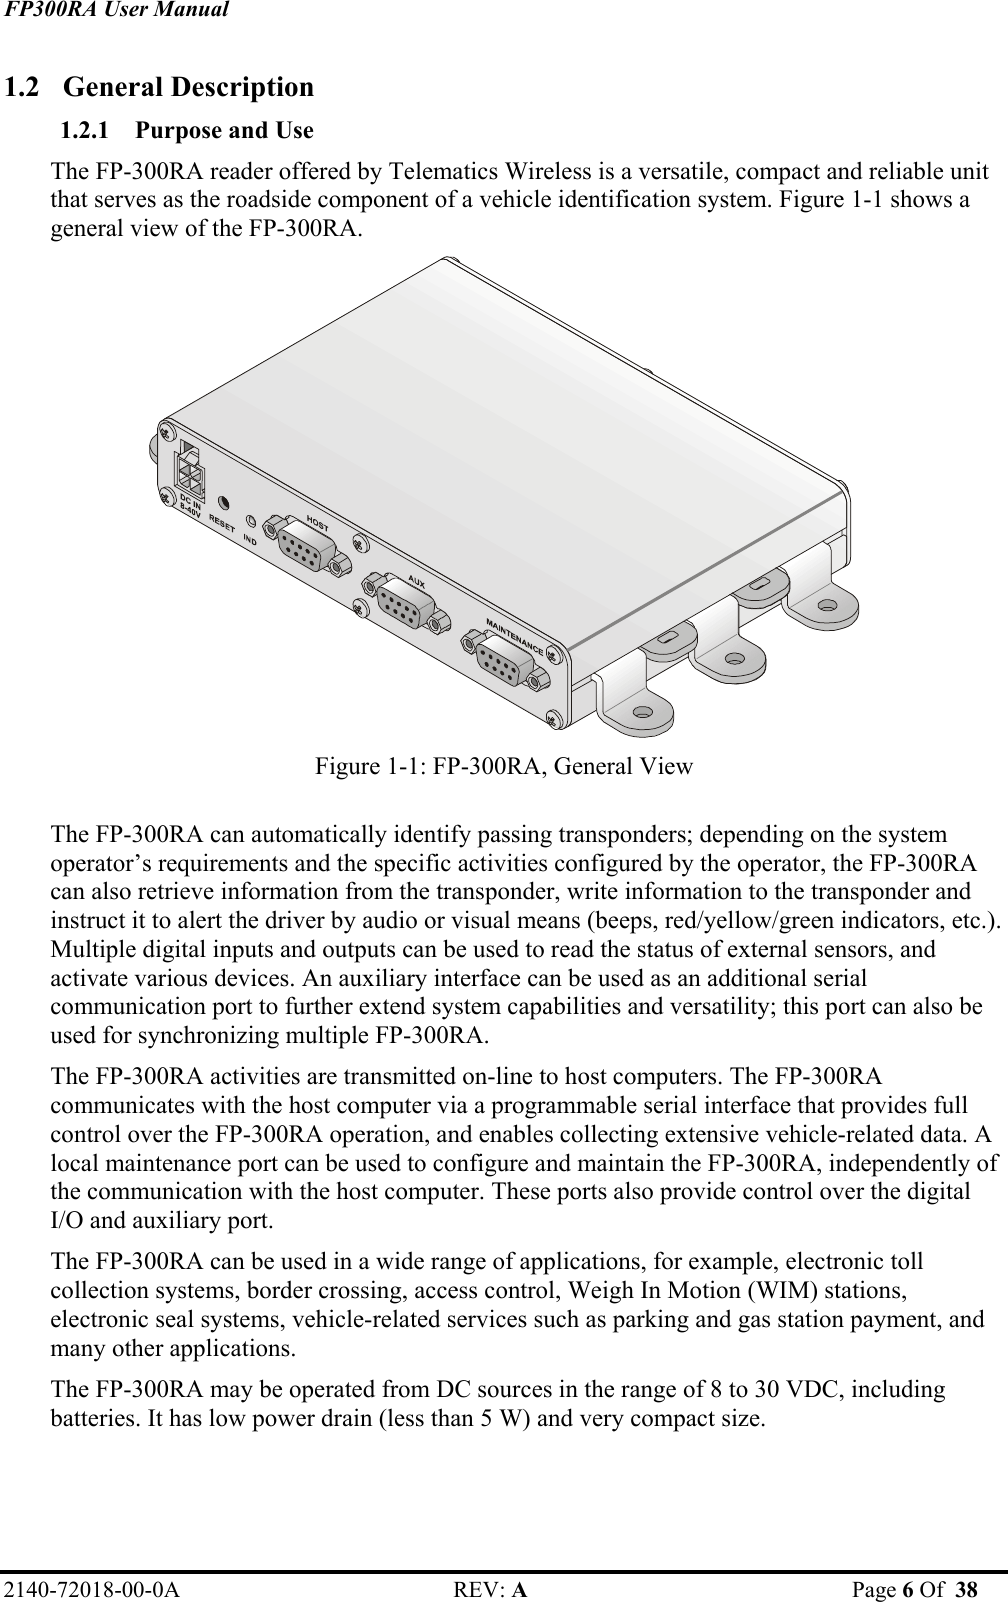 FP300RA User Manual 2140-72018-00-0A REV: A  Page 6 Of  38  1.2 General Description 1.2.1 Purpose and Use  The FP-300RA reader offered by Telematics Wireless is a versatile, compact and reliable unit that serves as the roadside component of a vehicle identification system. Figure 1-1 shows a general view of the FP-300RA.   Figure 1-1: FP-300RA, General View  The FP-300RA can automatically identify passing transponders; depending on the system operator’s requirements and the specific activities configured by the operator, the FP-300RA can also retrieve information from the transponder, write information to the transponder and instruct it to alert the driver by audio or visual means (beeps, red/yellow/green indicators, etc.). Multiple digital inputs and outputs can be used to read the status of external sensors, and activate various devices. An auxiliary interface can be used as an additional serial communication port to further extend system capabilities and versatility; this port can also be used for synchronizing multiple FP-300RA.  The FP-300RA activities are transmitted on-line to host computers. The FP-300RA communicates with the host computer via a programmable serial interface that provides full control over the FP-300RA operation, and enables collecting extensive vehicle-related data. A local maintenance port can be used to configure and maintain the FP-300RA, independently of the communication with the host computer. These ports also provide control over the digital I/O and auxiliary port. The FP-300RA can be used in a wide range of applications, for example, electronic toll collection systems, border crossing, access control, Weigh In Motion (WIM) stations, electronic seal systems, vehicle-related services such as parking and gas station payment, and many other applications.  The FP-300RA may be operated from DC sources in the range of 8 to 30 VDC, including batteries. It has low power drain (less than 5 W) and very compact size. 